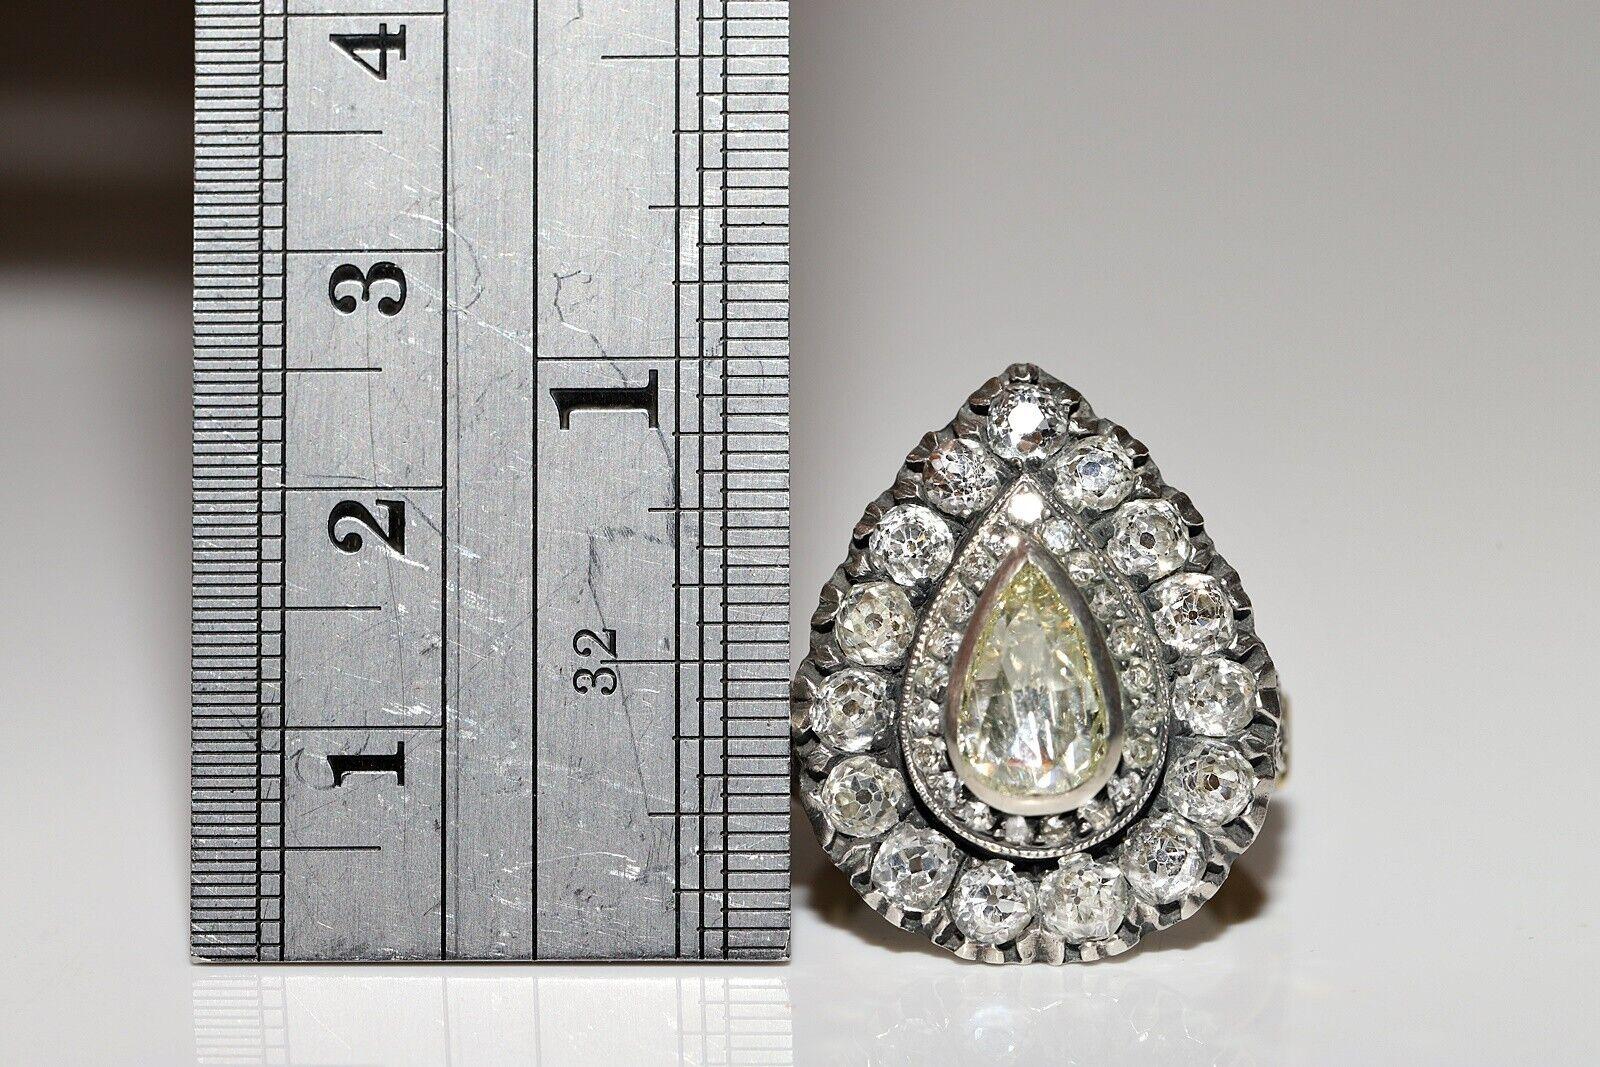 In very good condition.
Total weight is 16.9 grams.
Center rose cut diamond 0.96 carat.
Clarity is center rose cut diamond Light yellow color and s1 .
Side old cut diamond totally 3.87 carat.
Clarity is around diamond H-I color and vs-s1.
Ring size